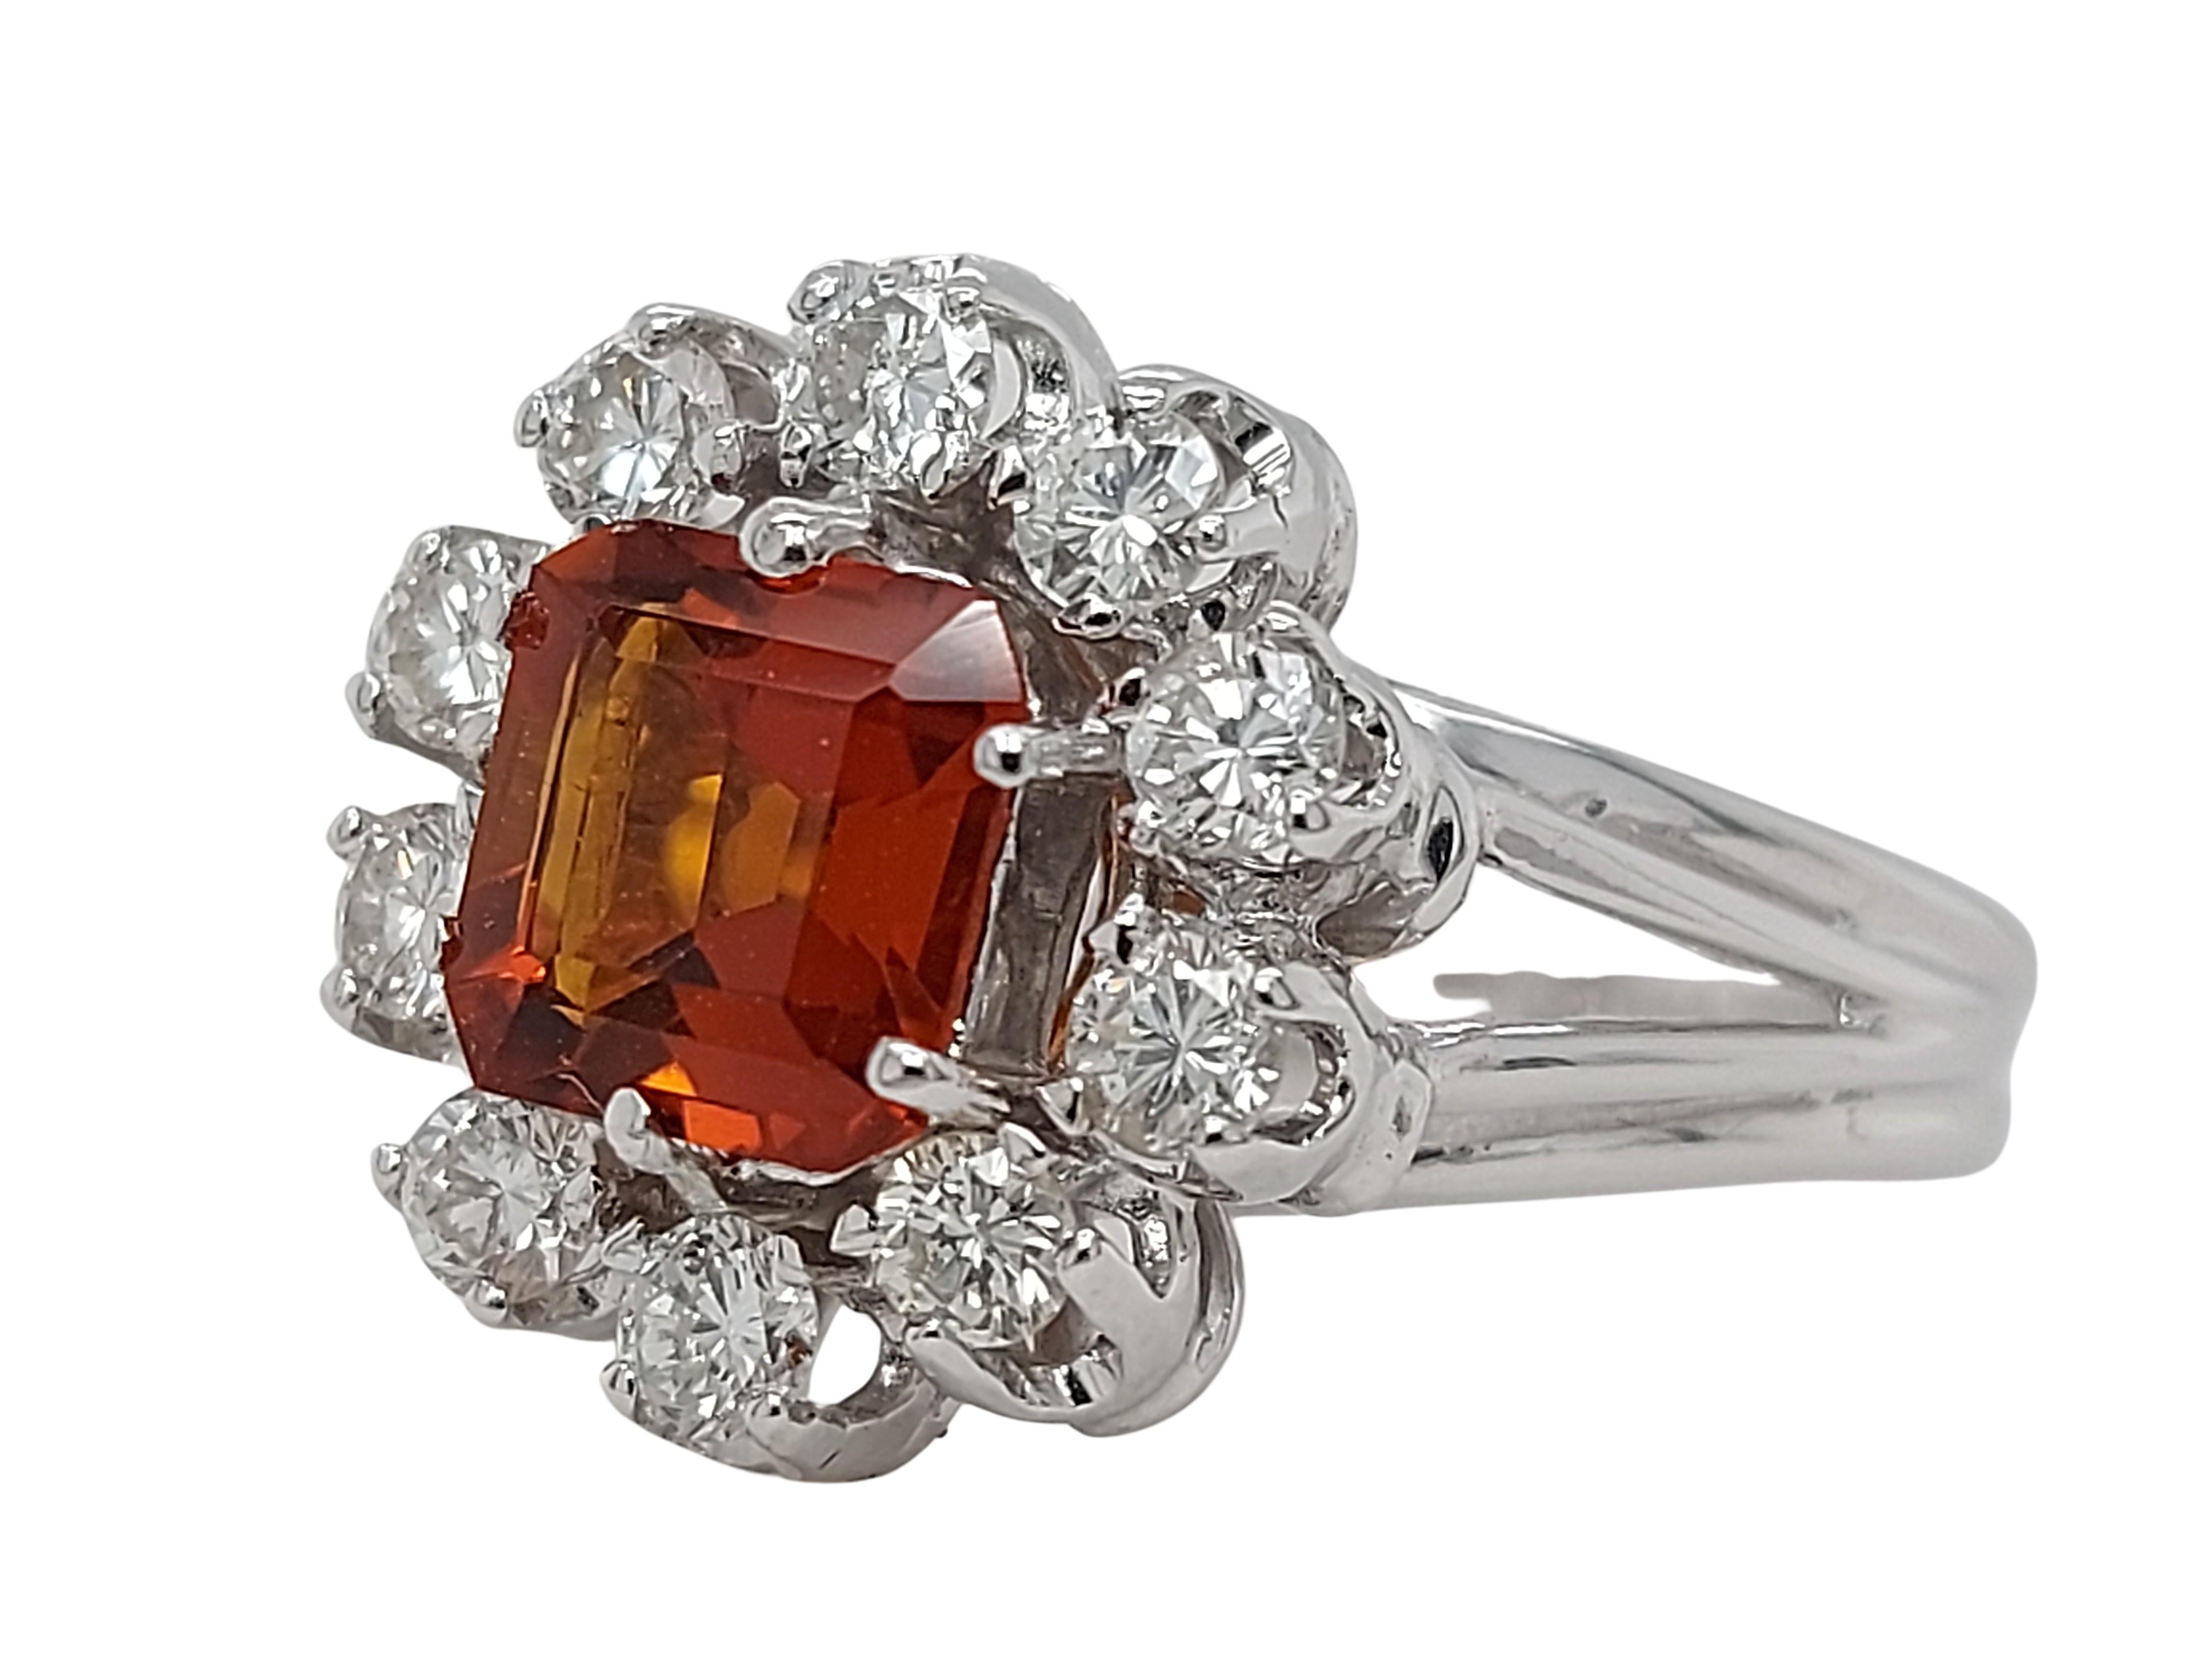 Emerald Cut Stunning Ring with a Big Citrine Stone Surrounded by Diamonds For Sale